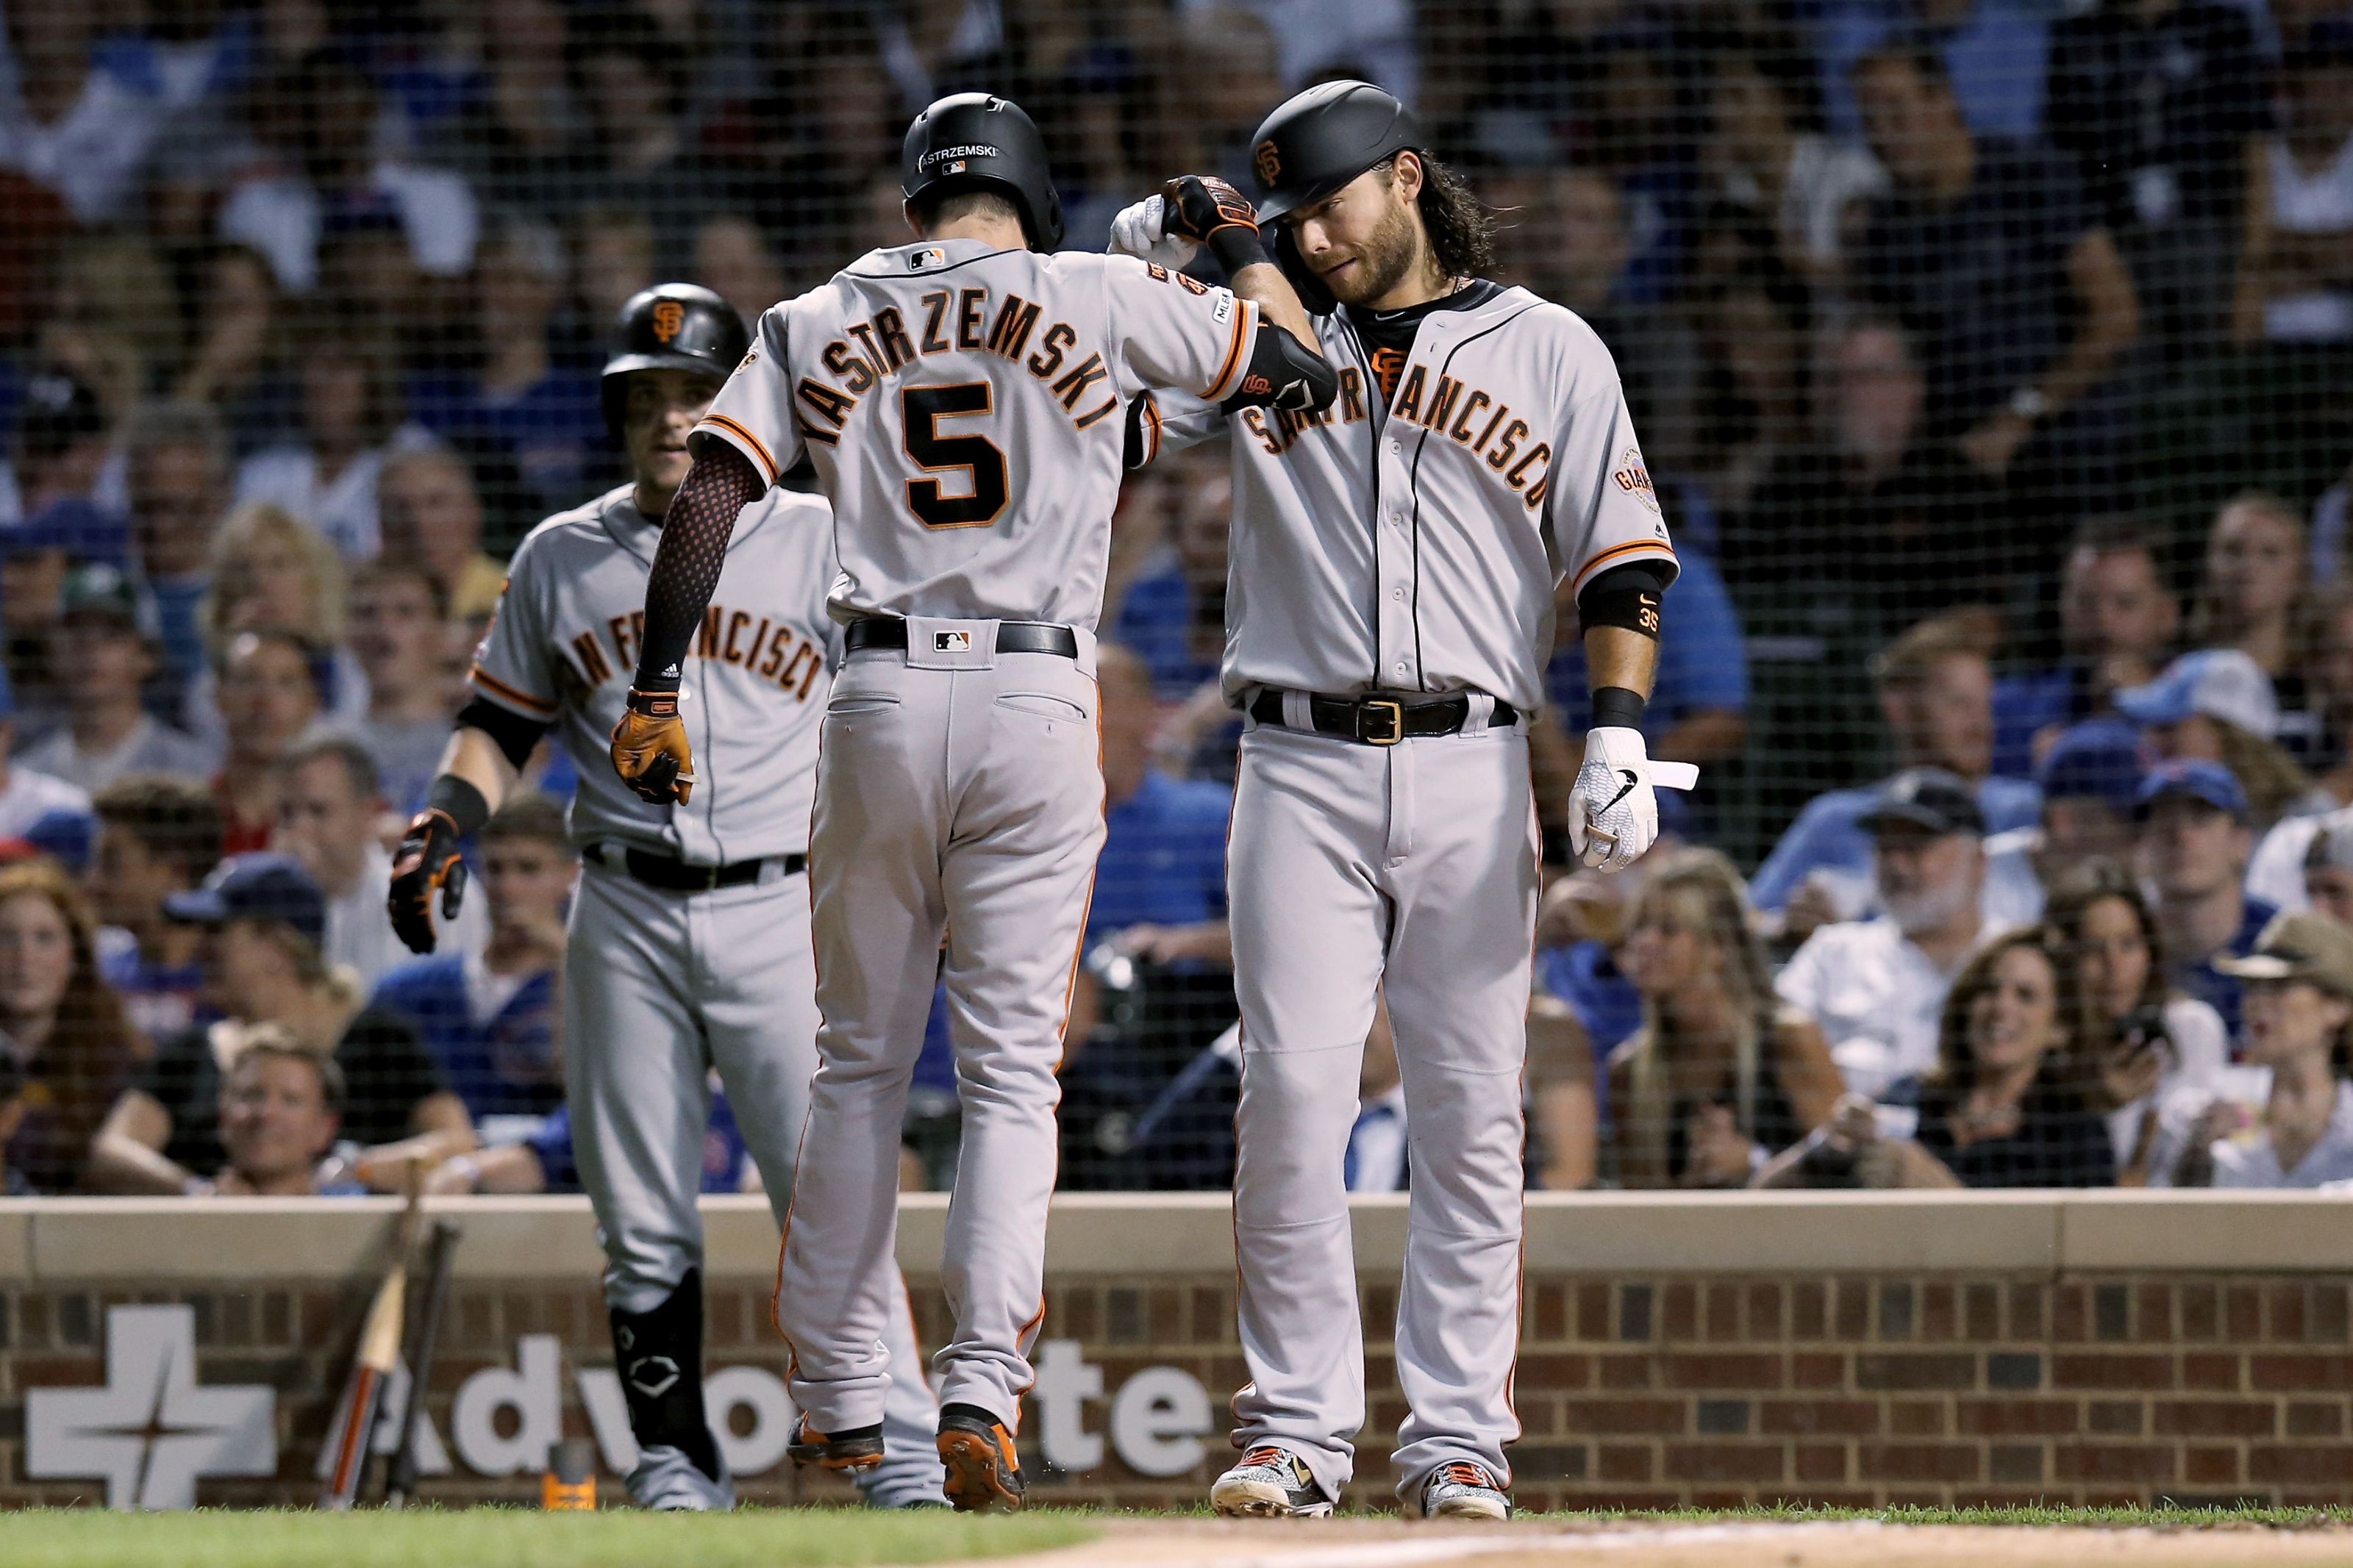 Evaluating the San Francisco Giants roster and free agency